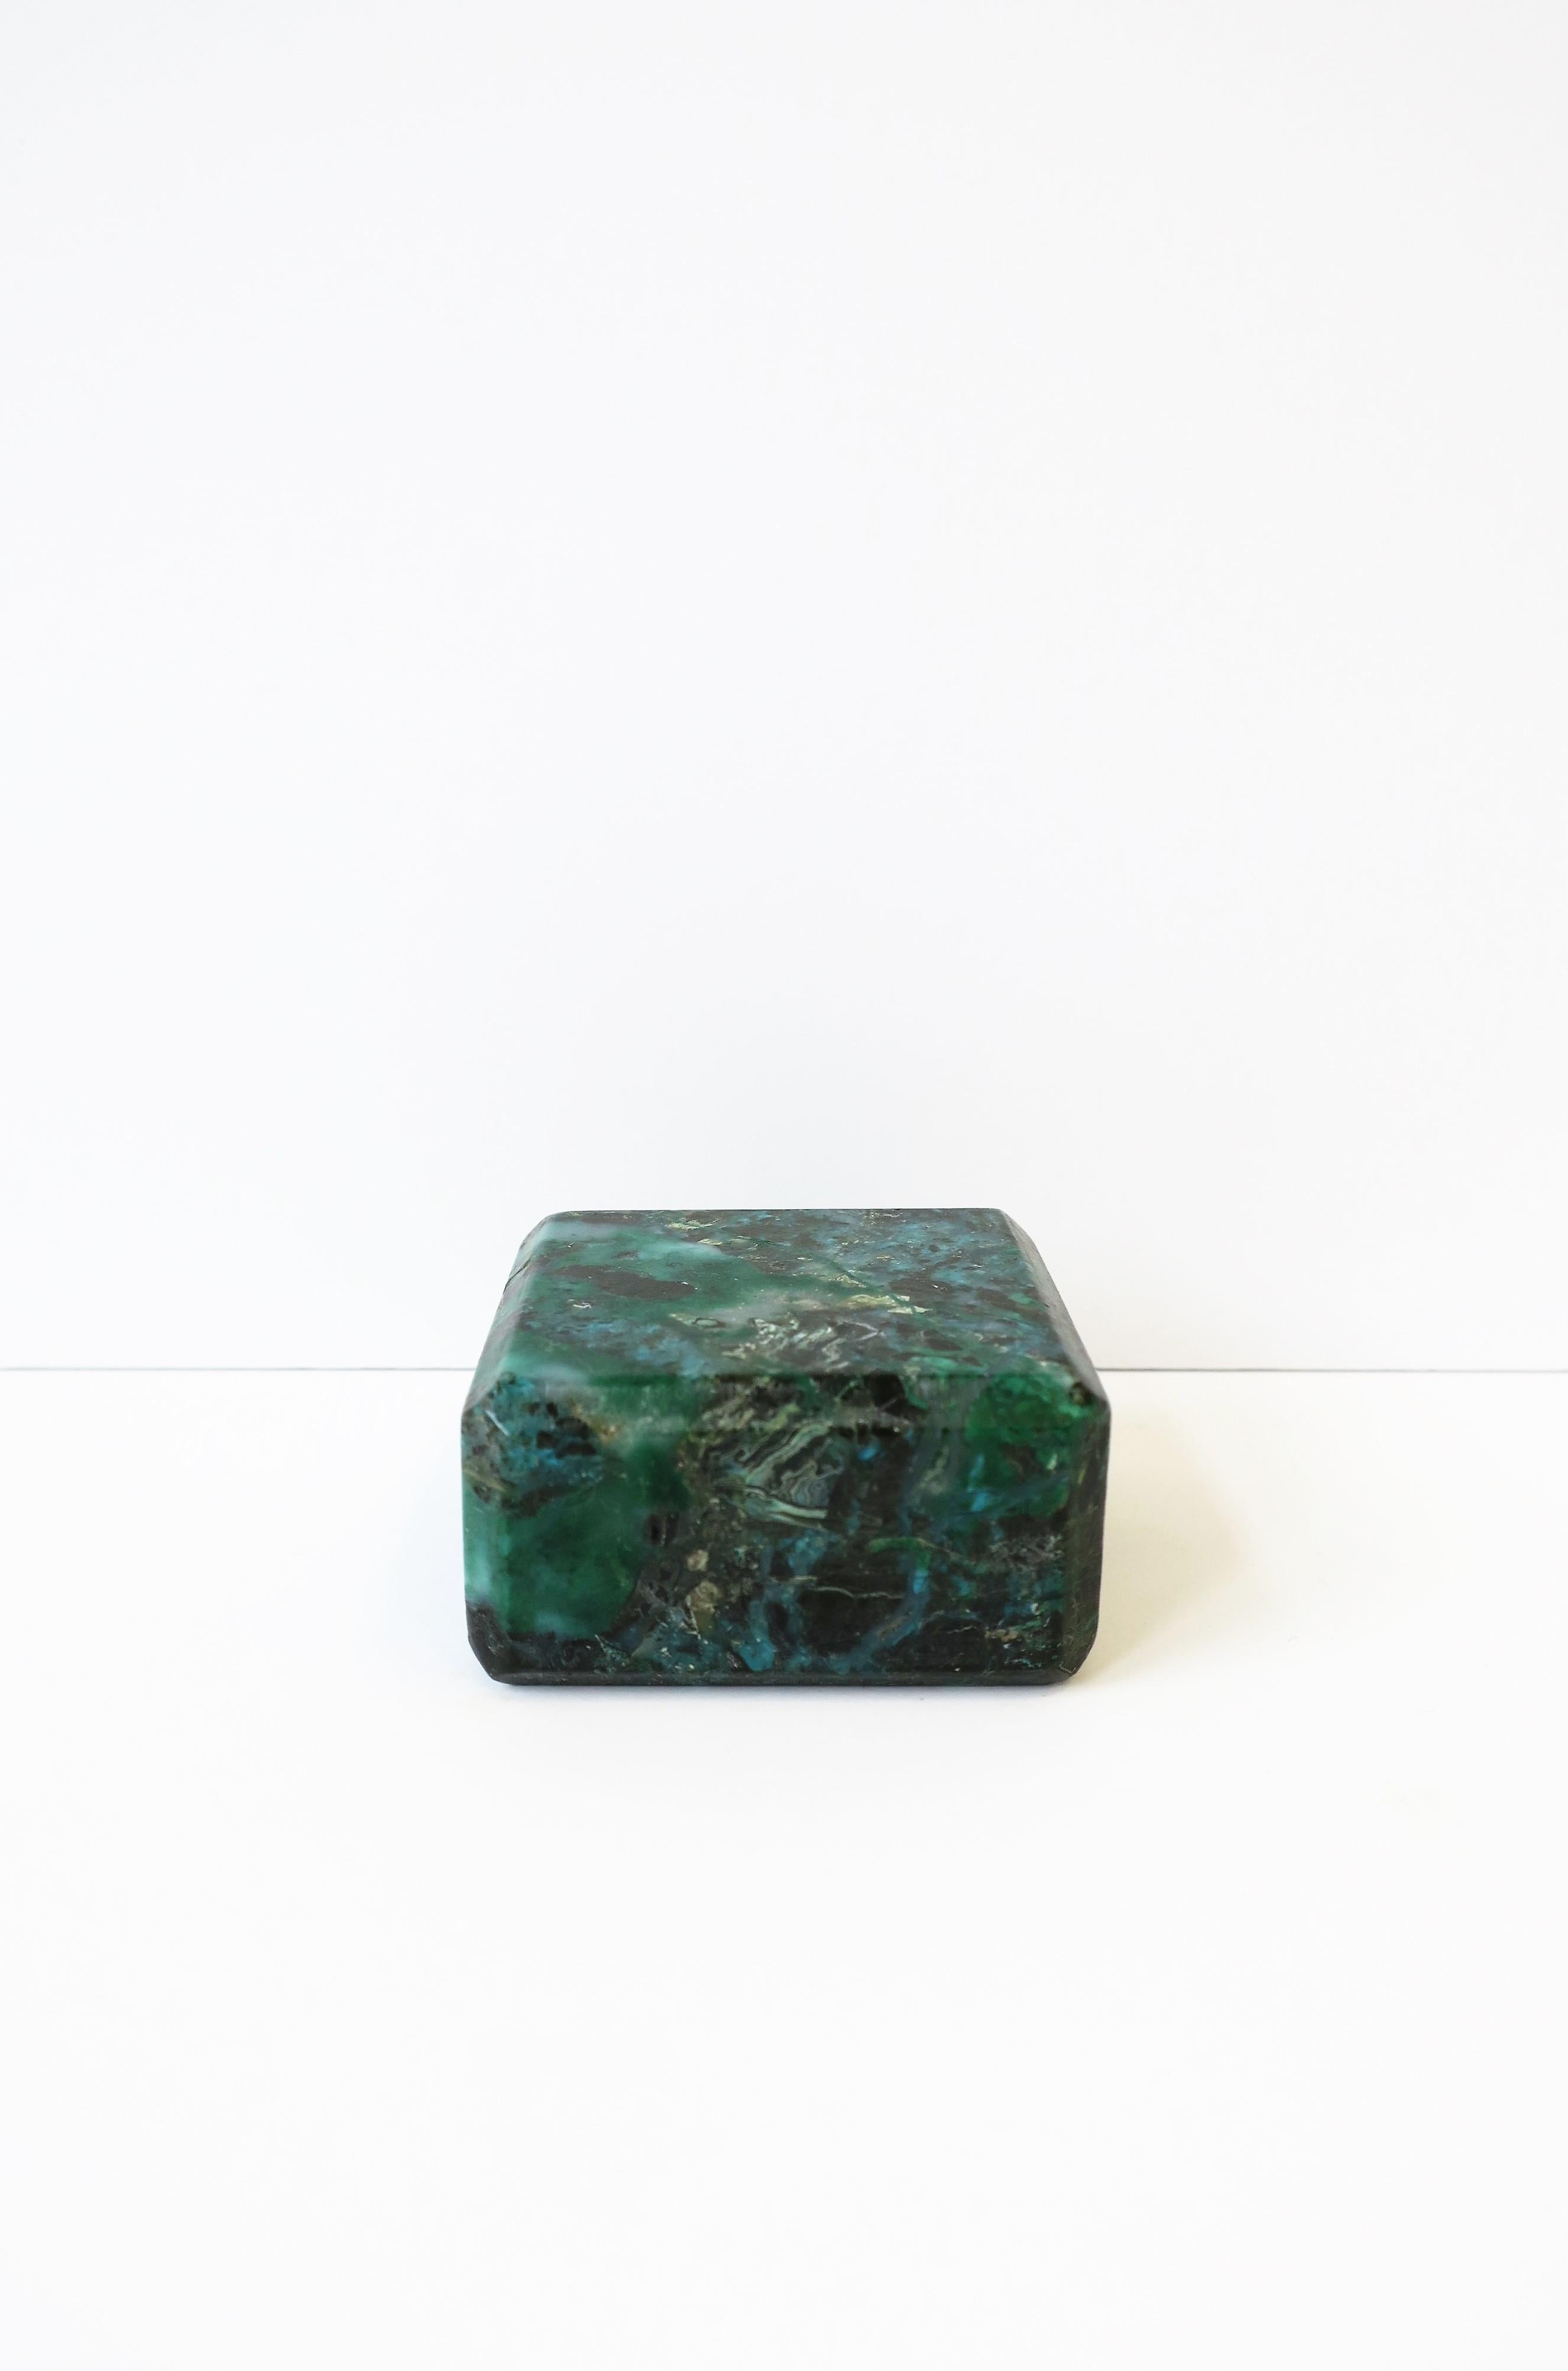 Modern Emerald Green and Blue Gem Cut Stone Object or Paperweight